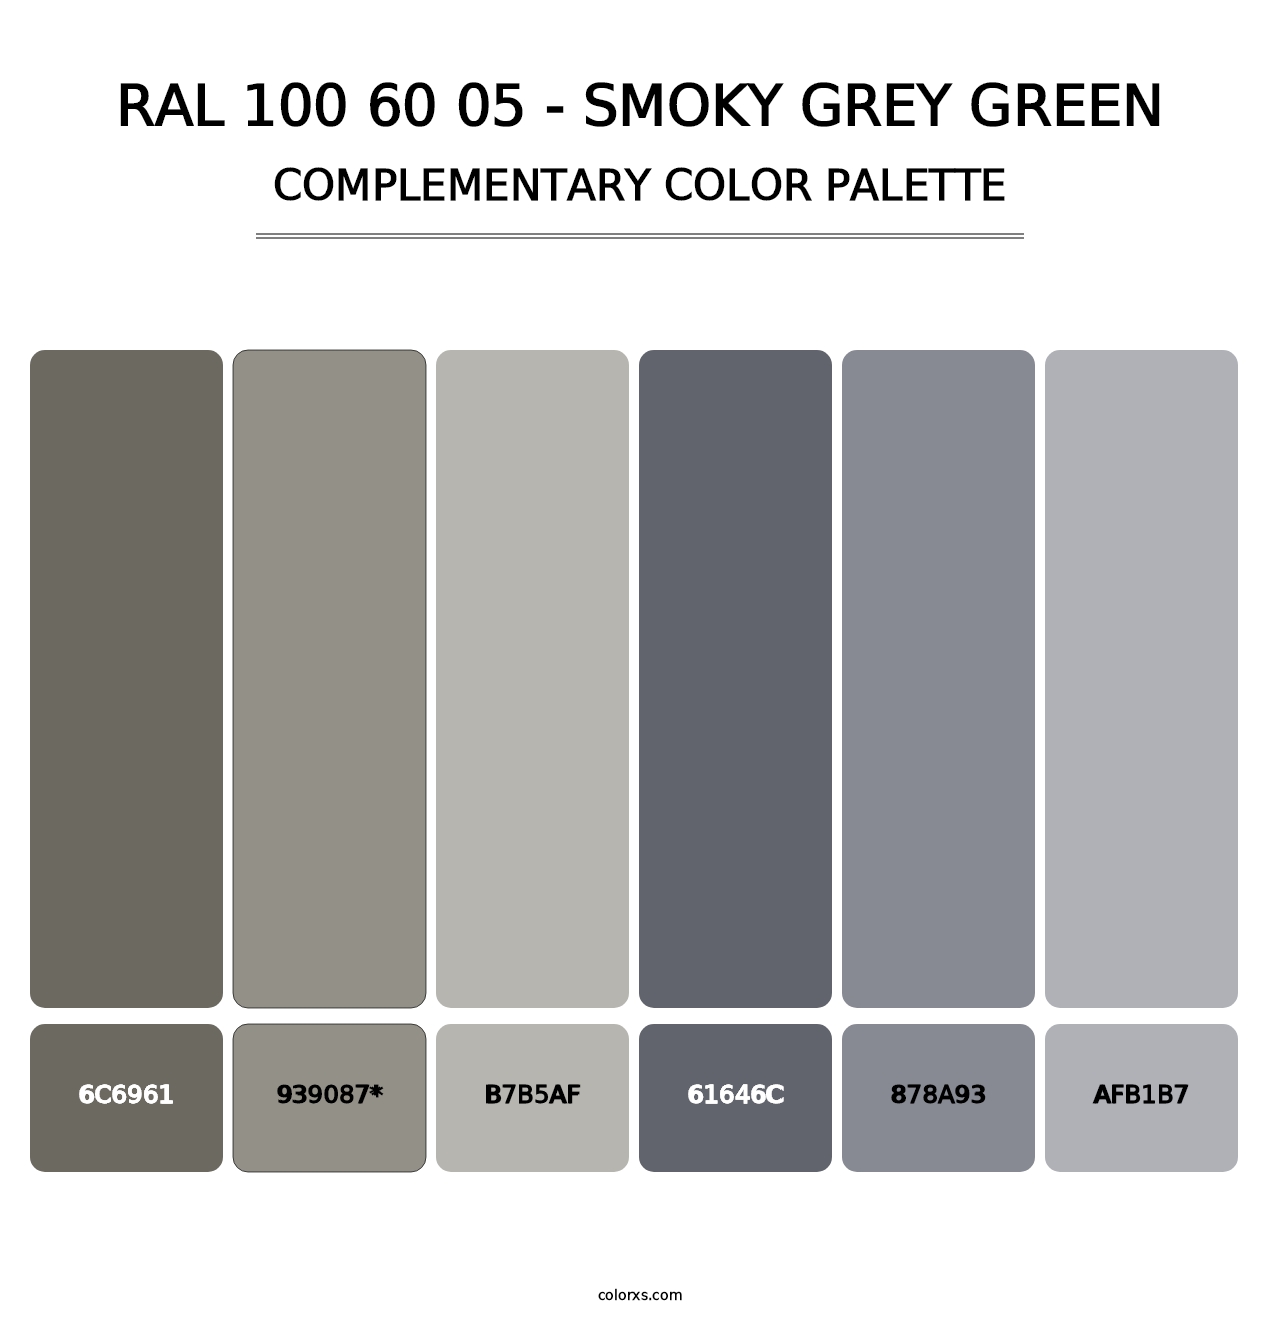 RAL 100 60 05 - Smoky Grey Green - Complementary Color Palette